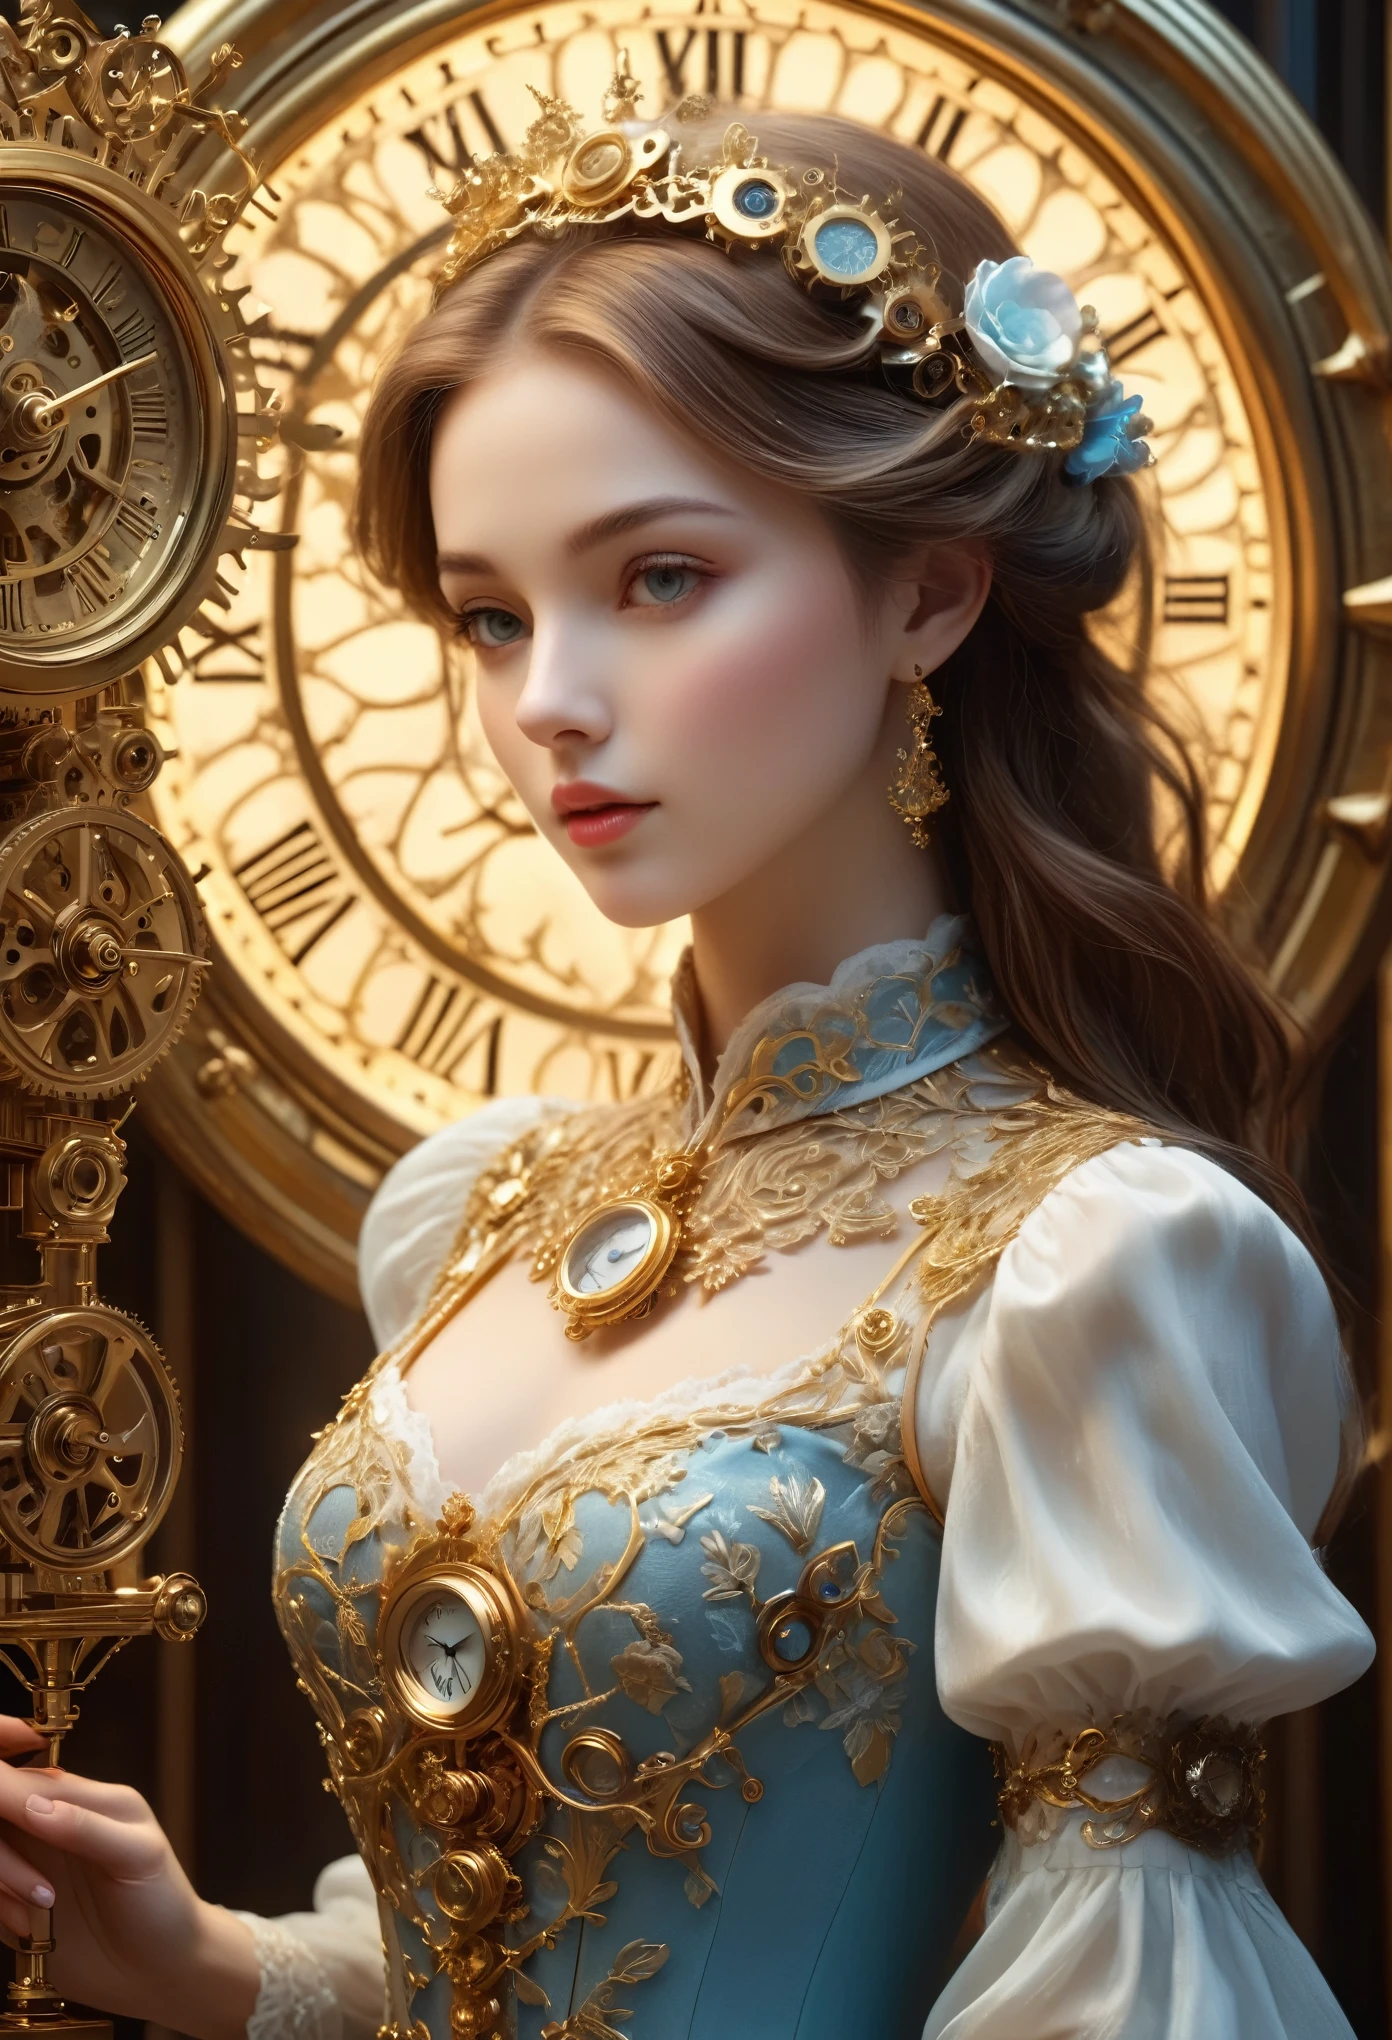 (best quality,4k,8k,highres,masterpiece:1.2),ultra-detailed,(realistic,photorealistic,photo-realistic:1.37),intricate mechanism of a mechanical clock, dreamlike atmosphere, world's most beautiful girl, fine illustrations, antique gold and brass material, enchanting lighting, delicate gears, intricate clock hands, exquisite clockwork details, mesmerizing mechanical movements, magical aura, ethereal beauty, magical ambiance, delicate porcelain skin, captivating expression, elegant attire, graceful posture, intricate lace patterns, soft pastel colors, enchanting background scenery, whimsical storytelling, mysterious and enchanting storyline, suspenseful plot, magical charm, vivid and dynamic brushstrokes